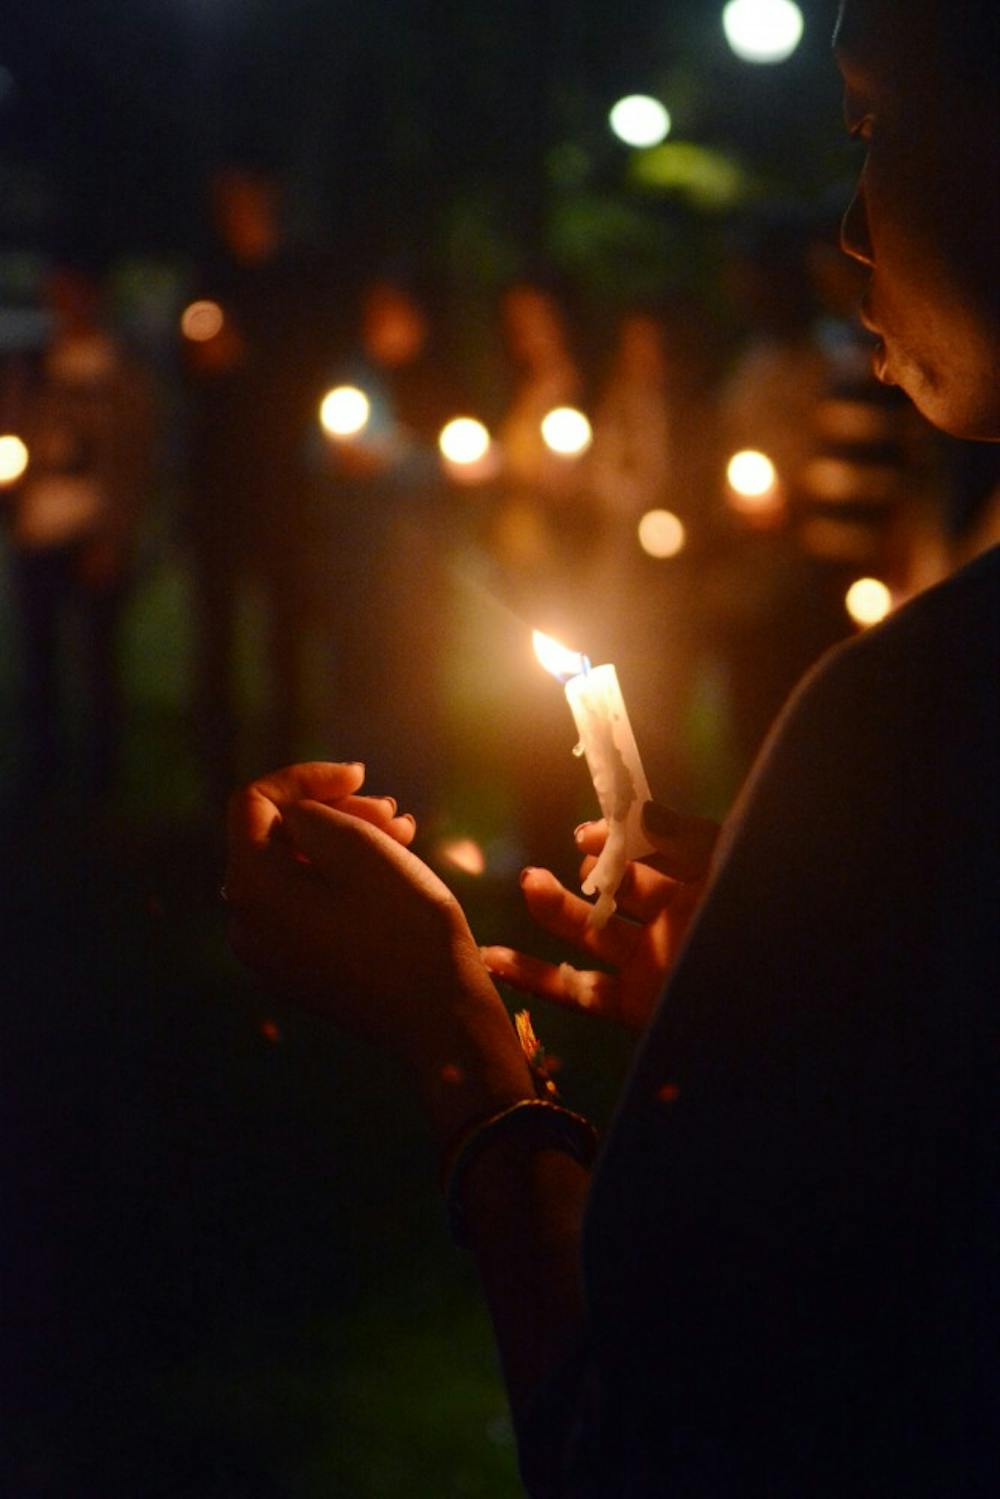 22 Minutes for 2200 Lives: Candlelight vigil in remembrance of lives lost in Gaza